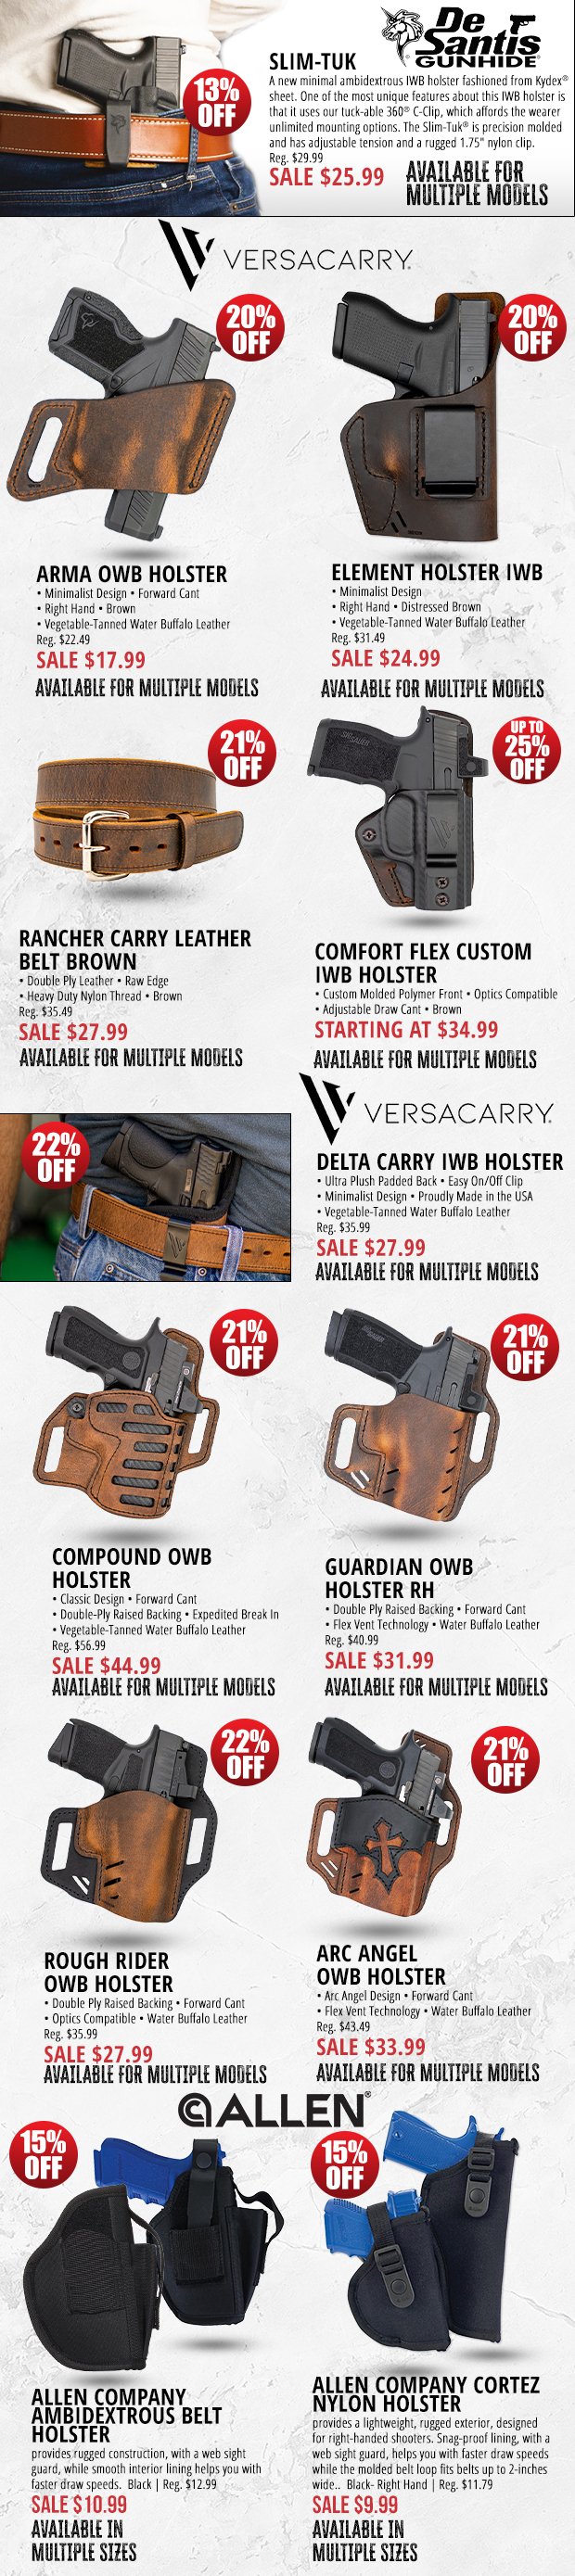 Big Savings On Top Holsters Up To 25% Off!